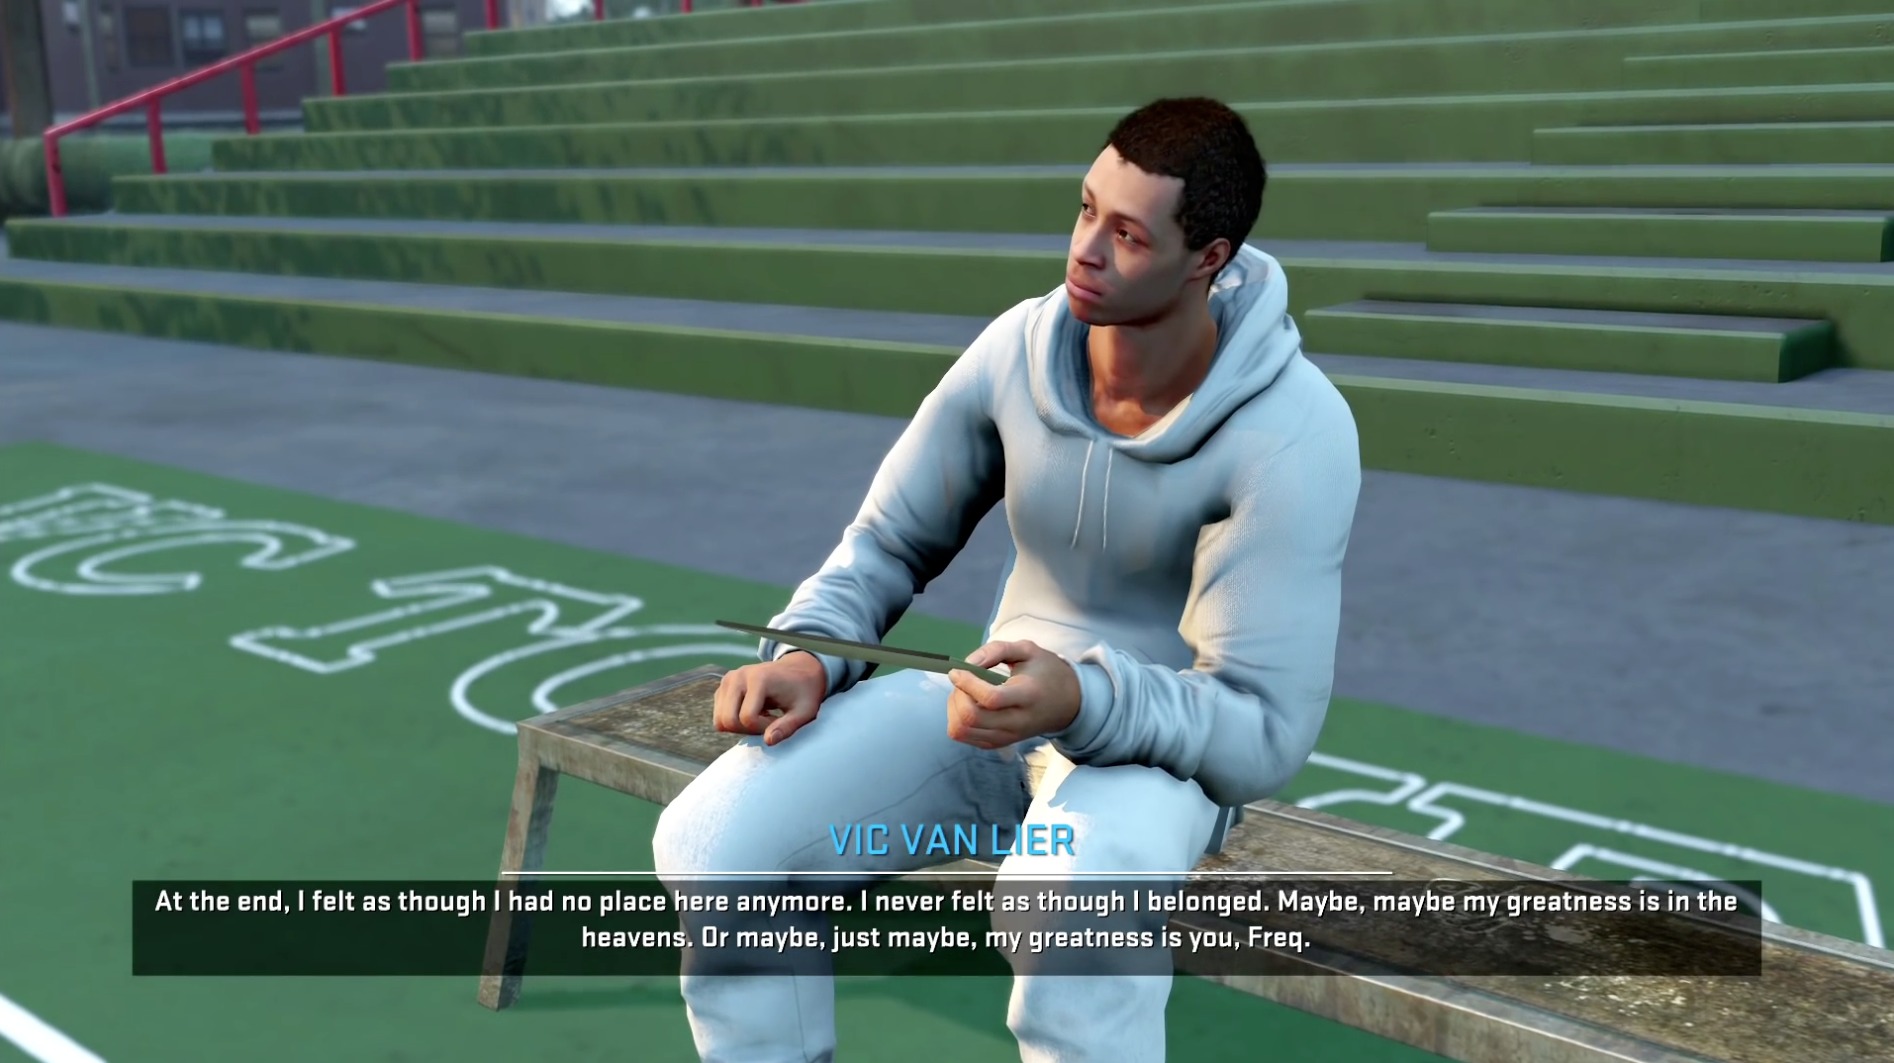 Vic Van Lier from NBA 2K16 reading his famous letter.